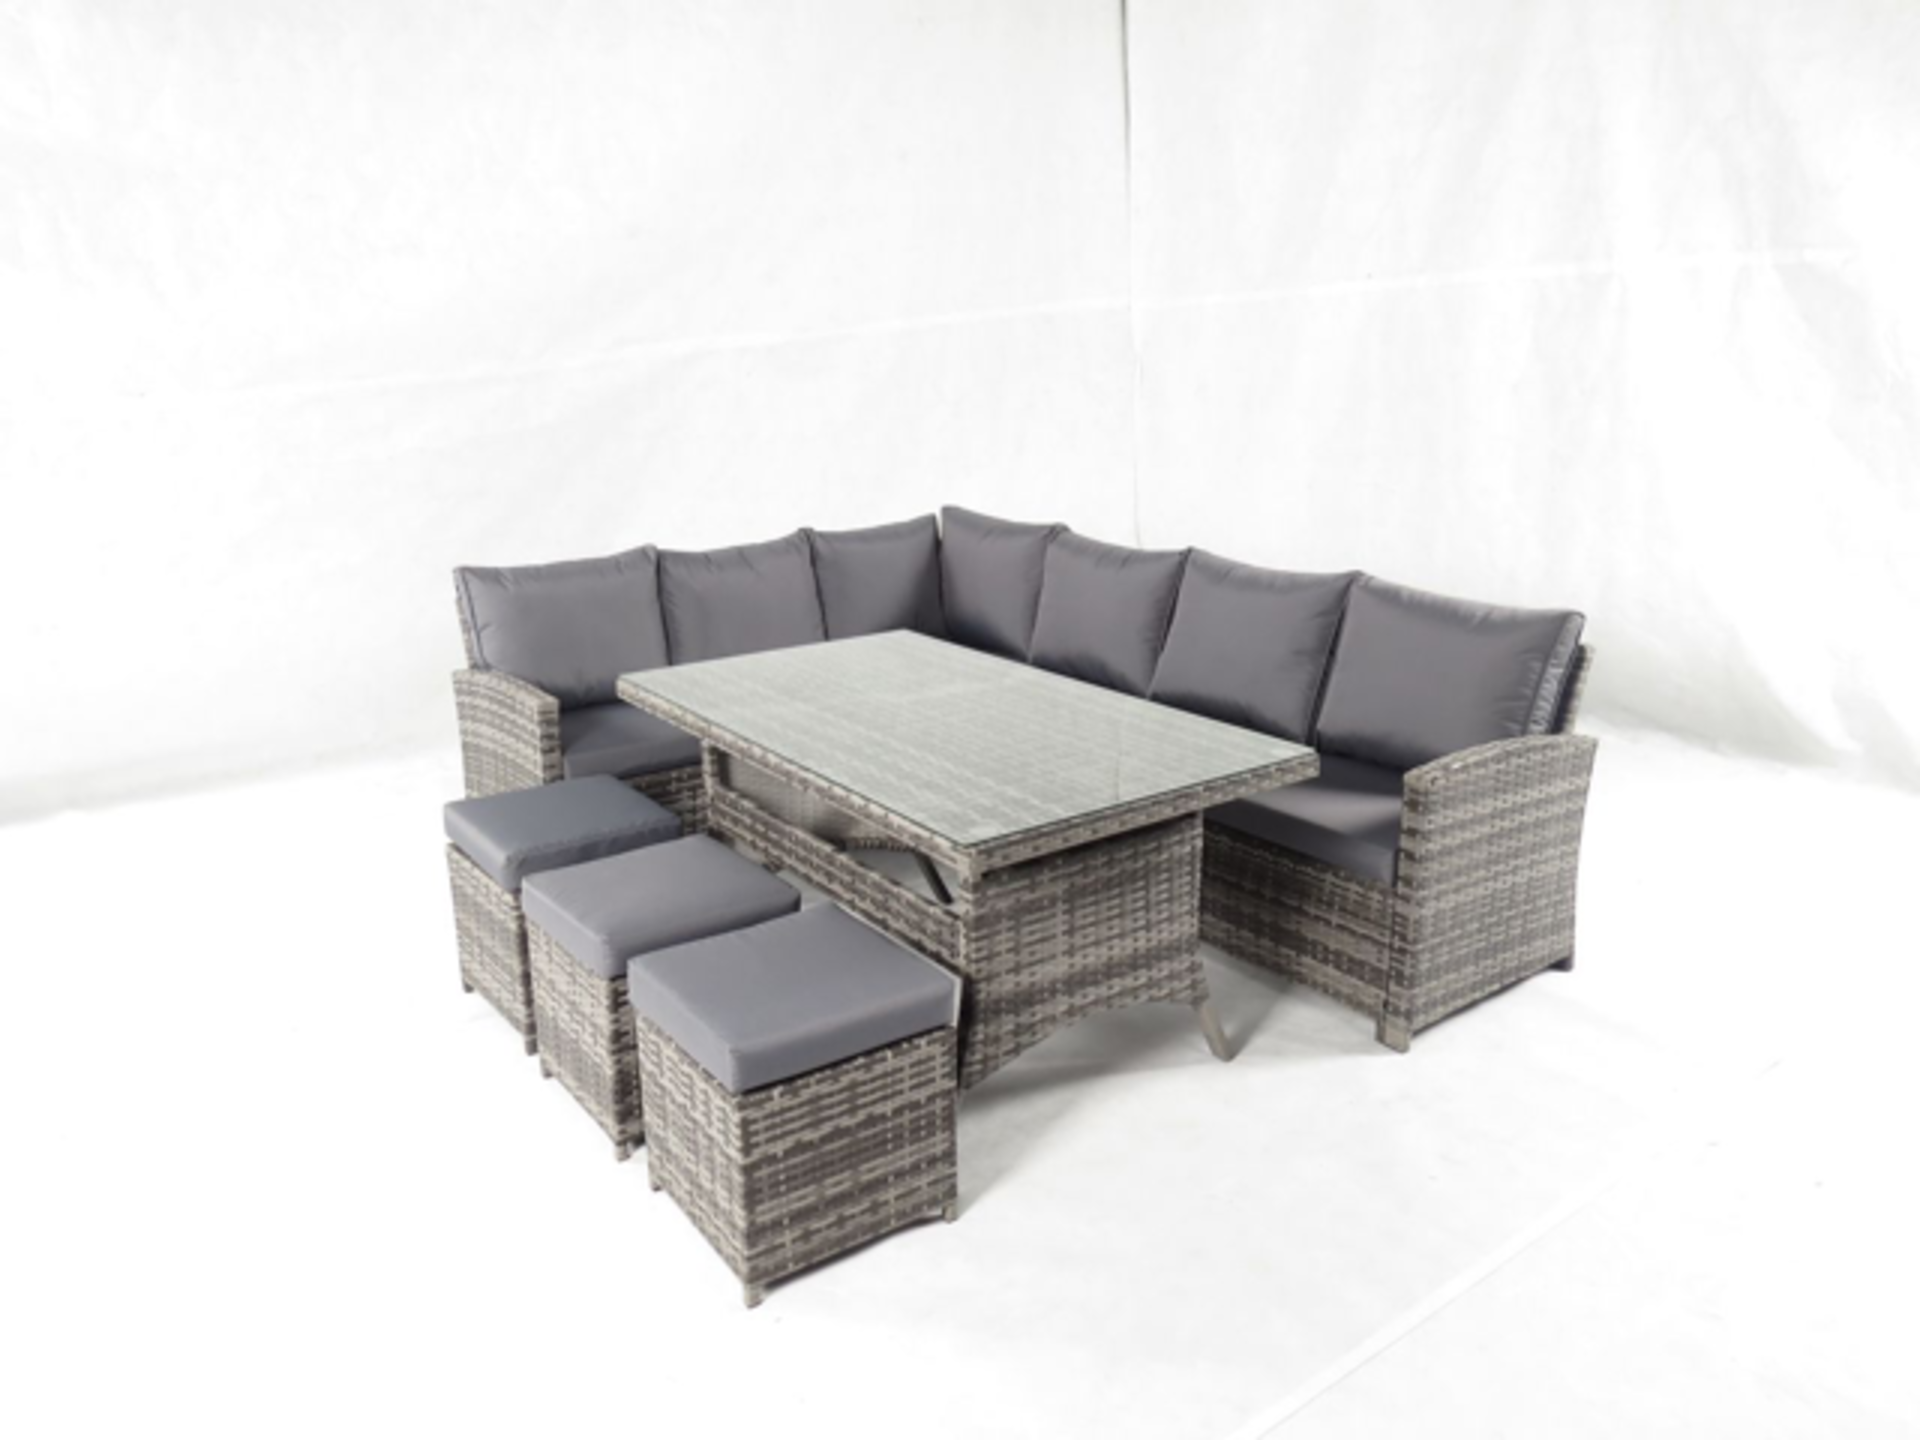 Brand New Luxury Furniture, 10 Seater Outdoor Table Dining Set in Grey with Grey Cushions. RRP £2999 - Image 2 of 4